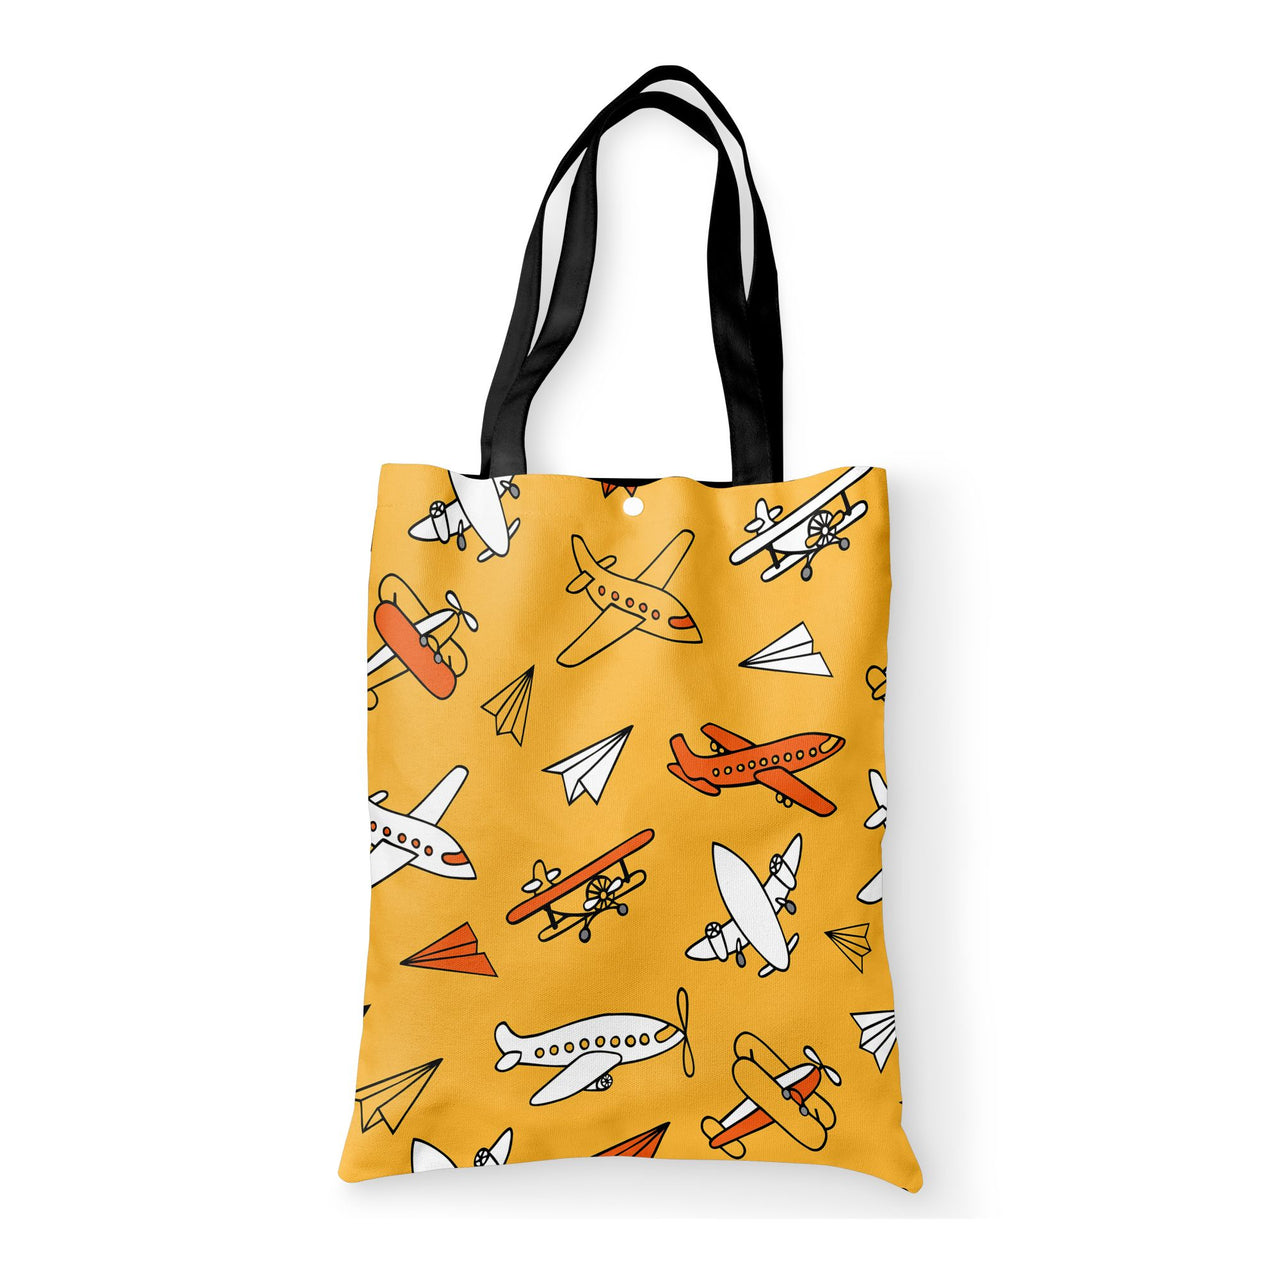 Super Drawings of Airplanes Designed Tote Bags